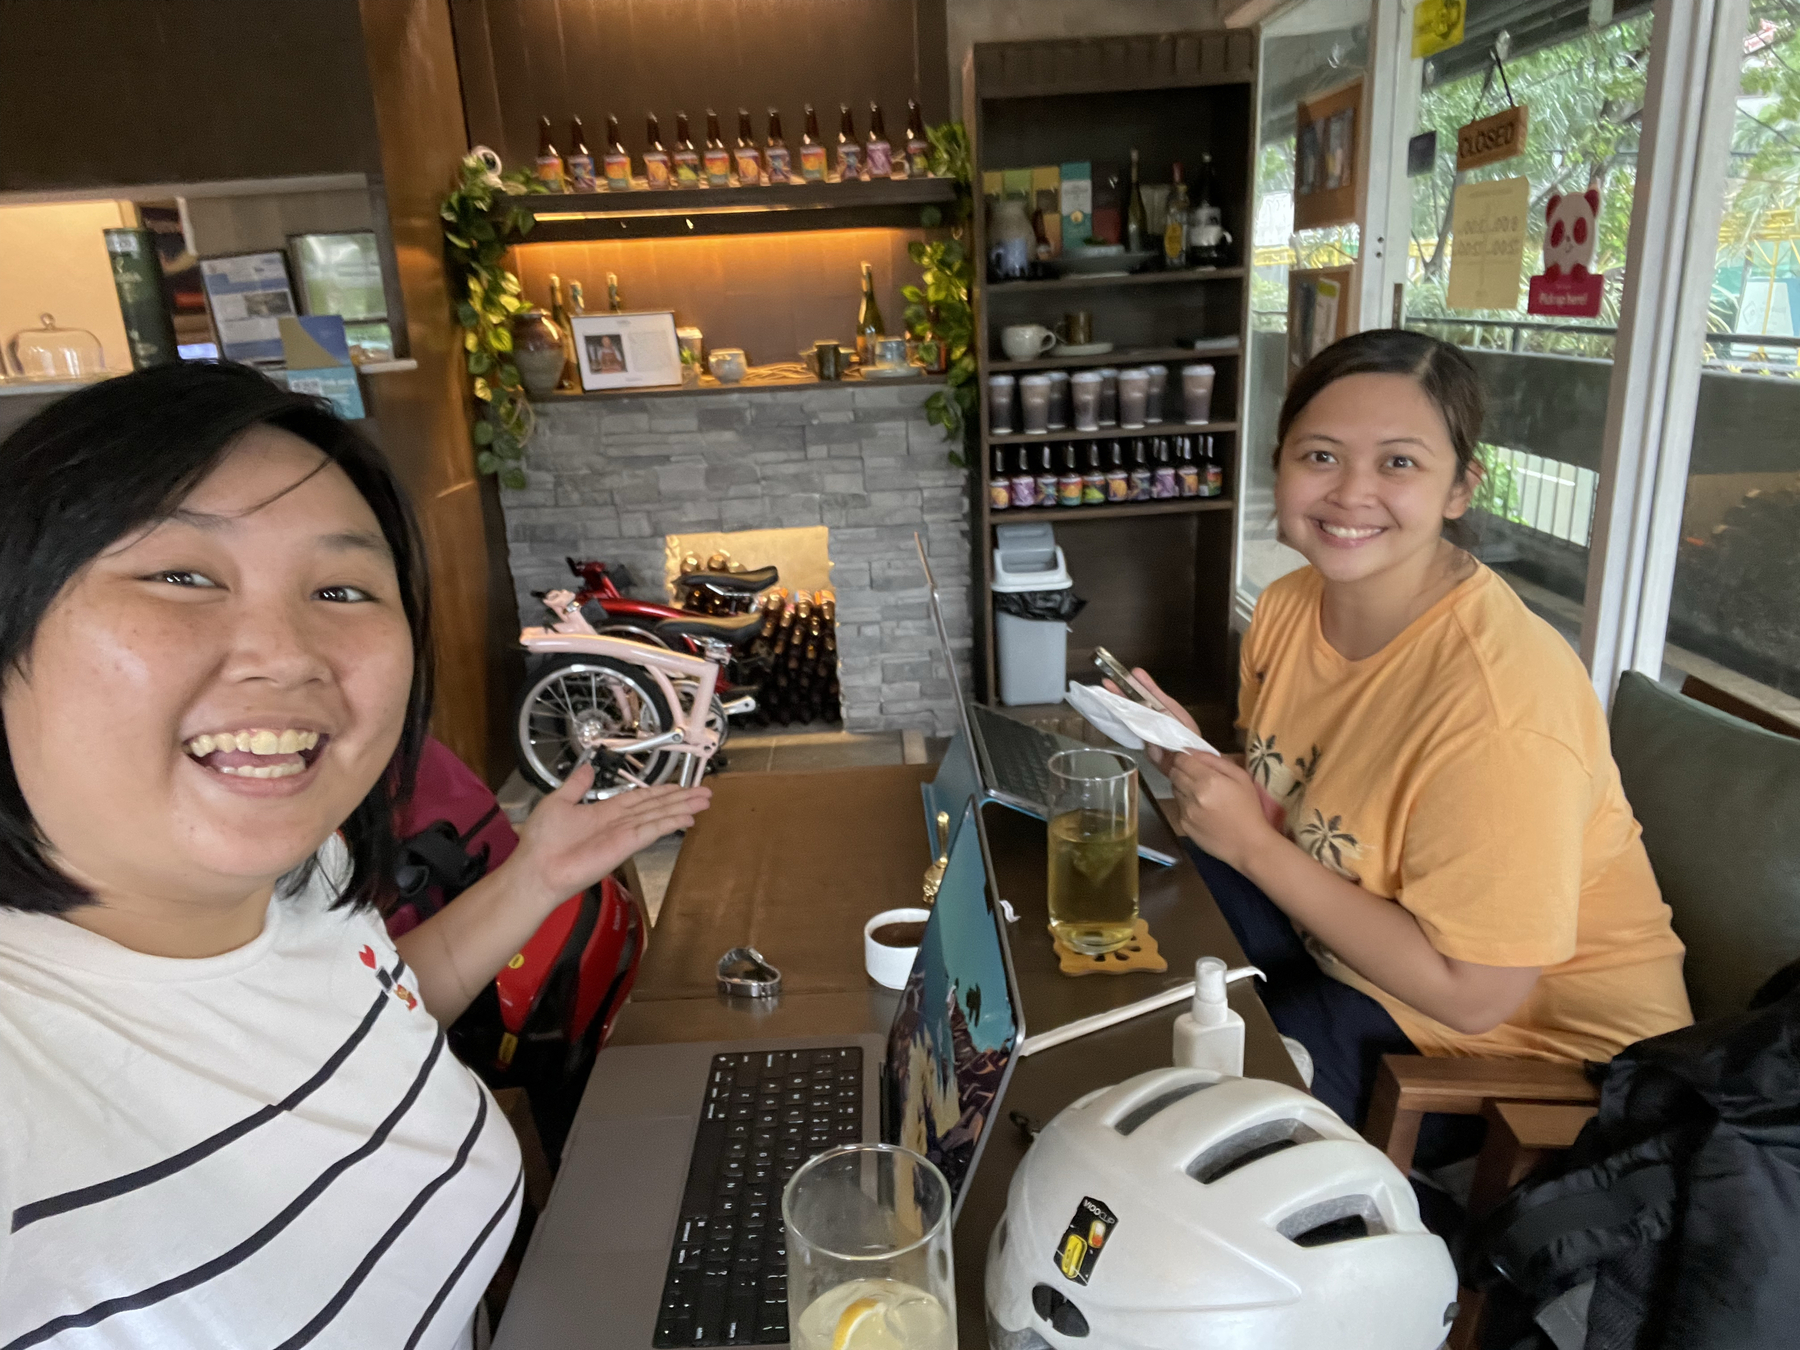 Chi and Karen posing for a selfie. In the background you can see both Chi's red trifold and Karen's blush pink trifold folded in the background. On the table, both Chi and Karen have their laptops out, and are co-working.